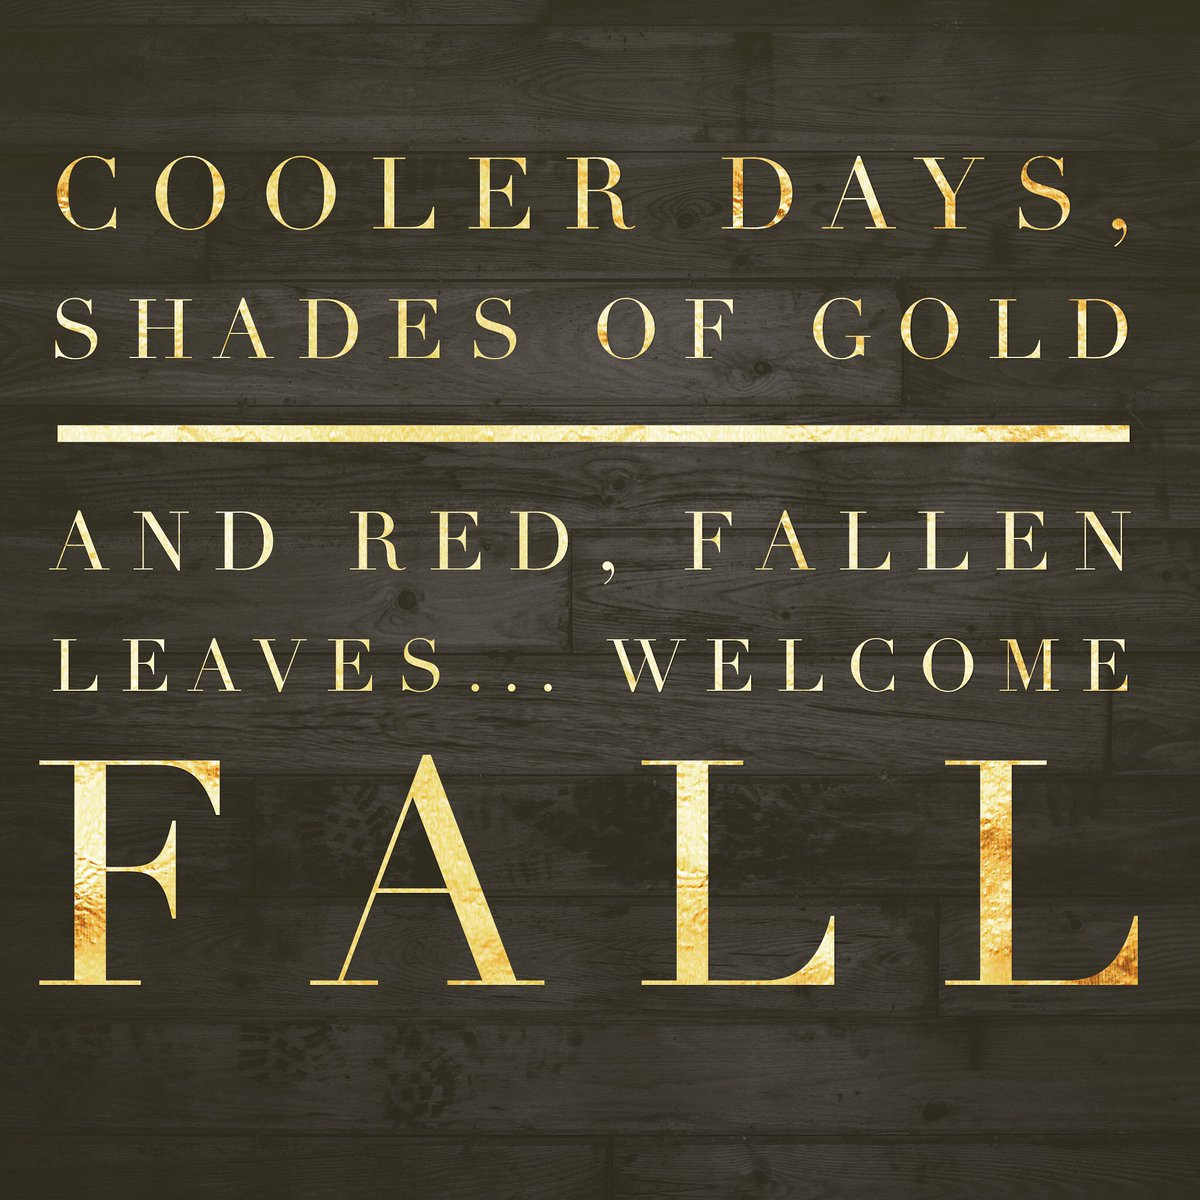 Welcome Fall... #FirstDayofFall #AutumnalEquinox #fall #welcomefall ???? https://t.co/rDlCpJkfgy